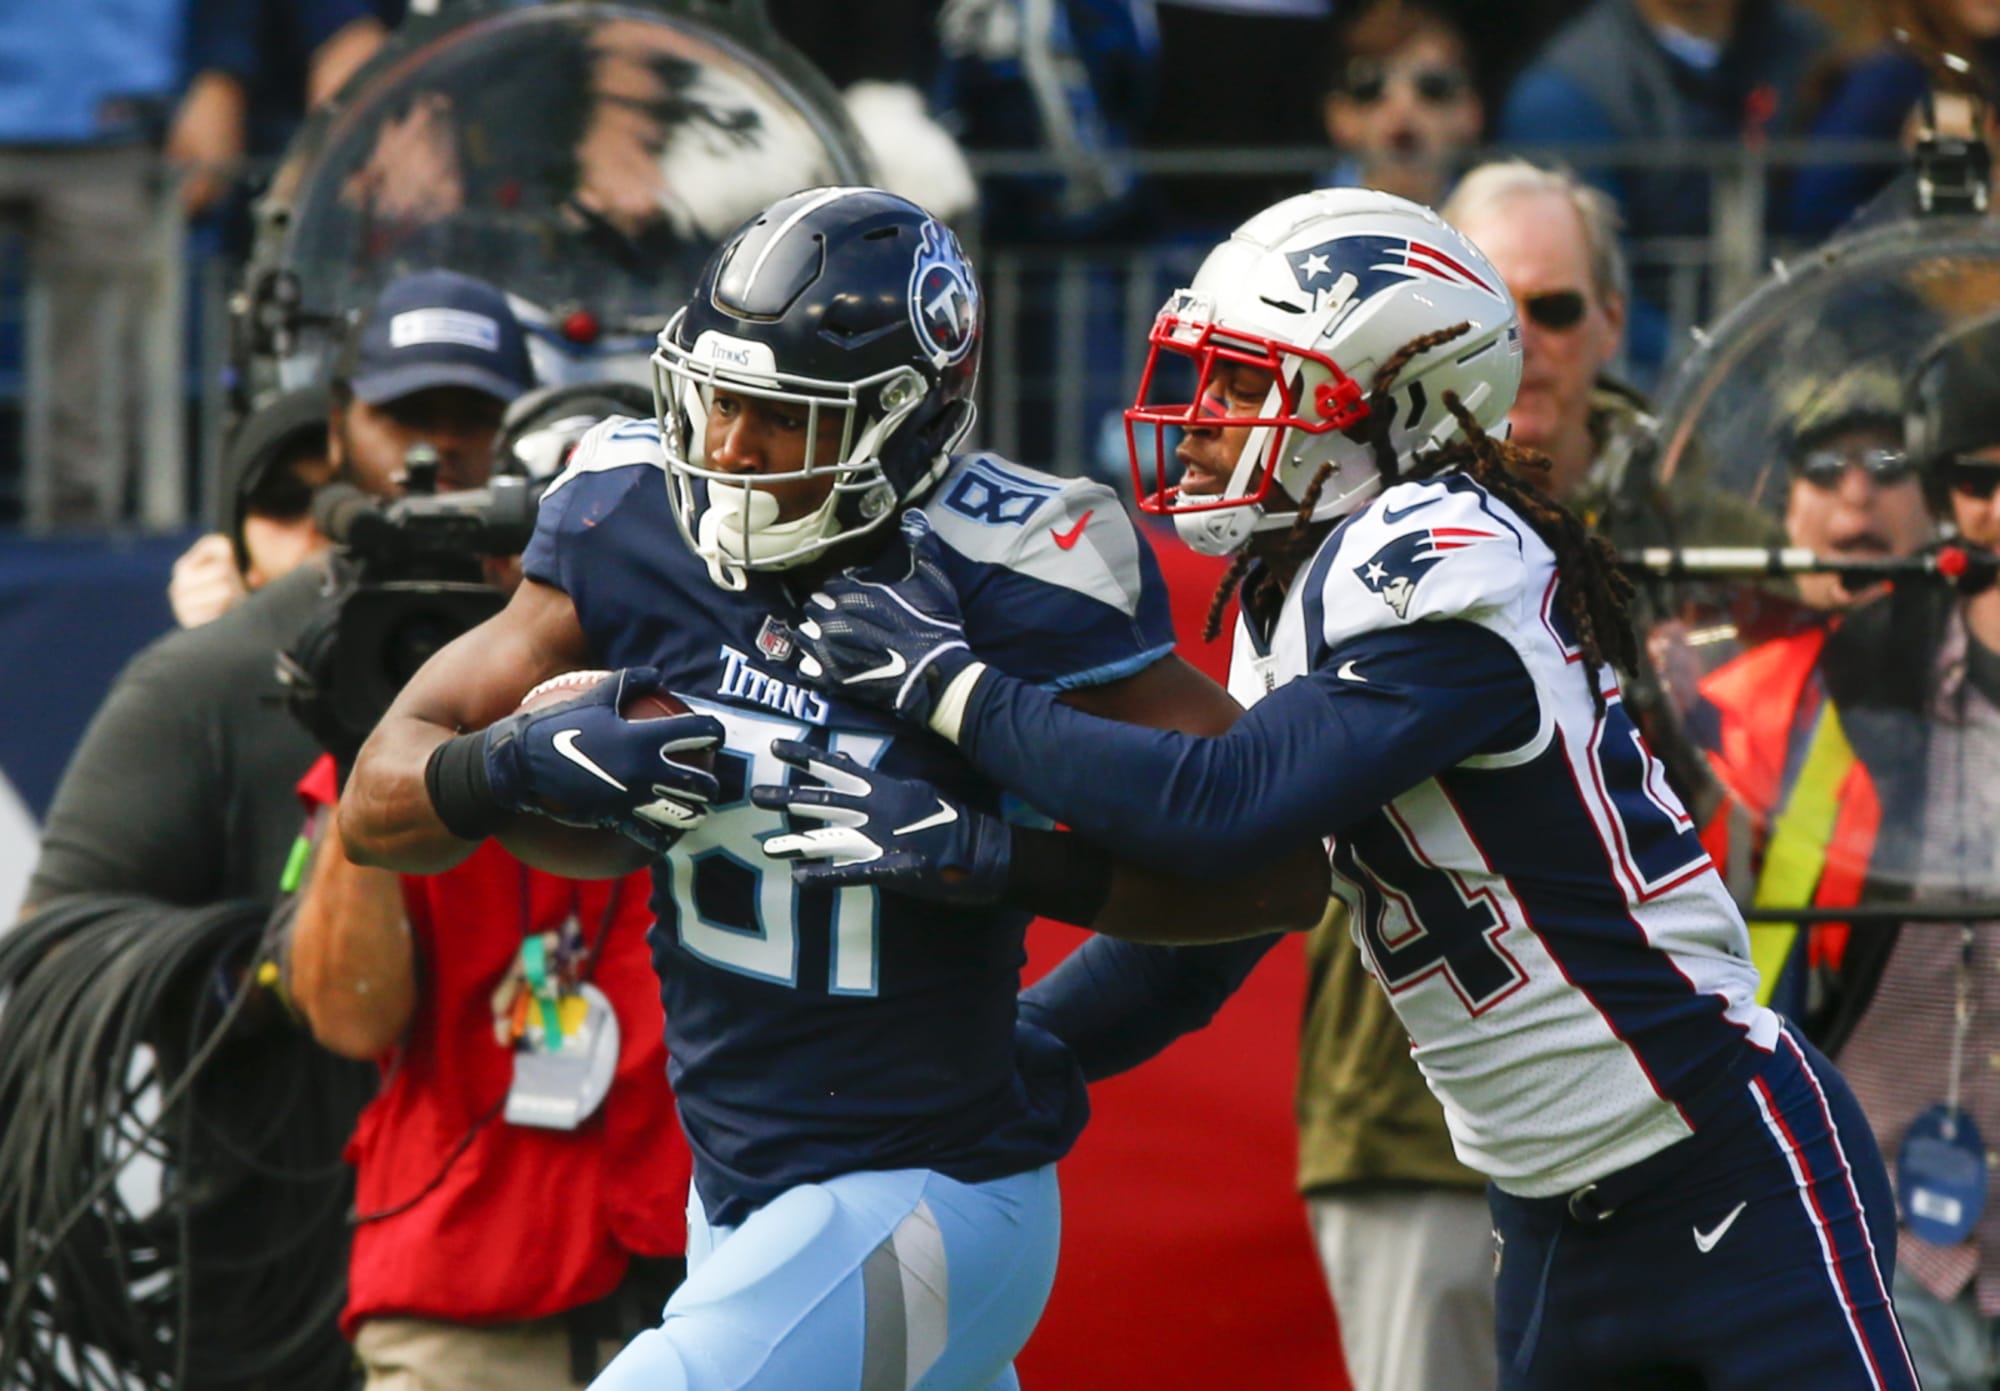 Patriots vs. Titans: What to expect in Saturday's Wildcard game